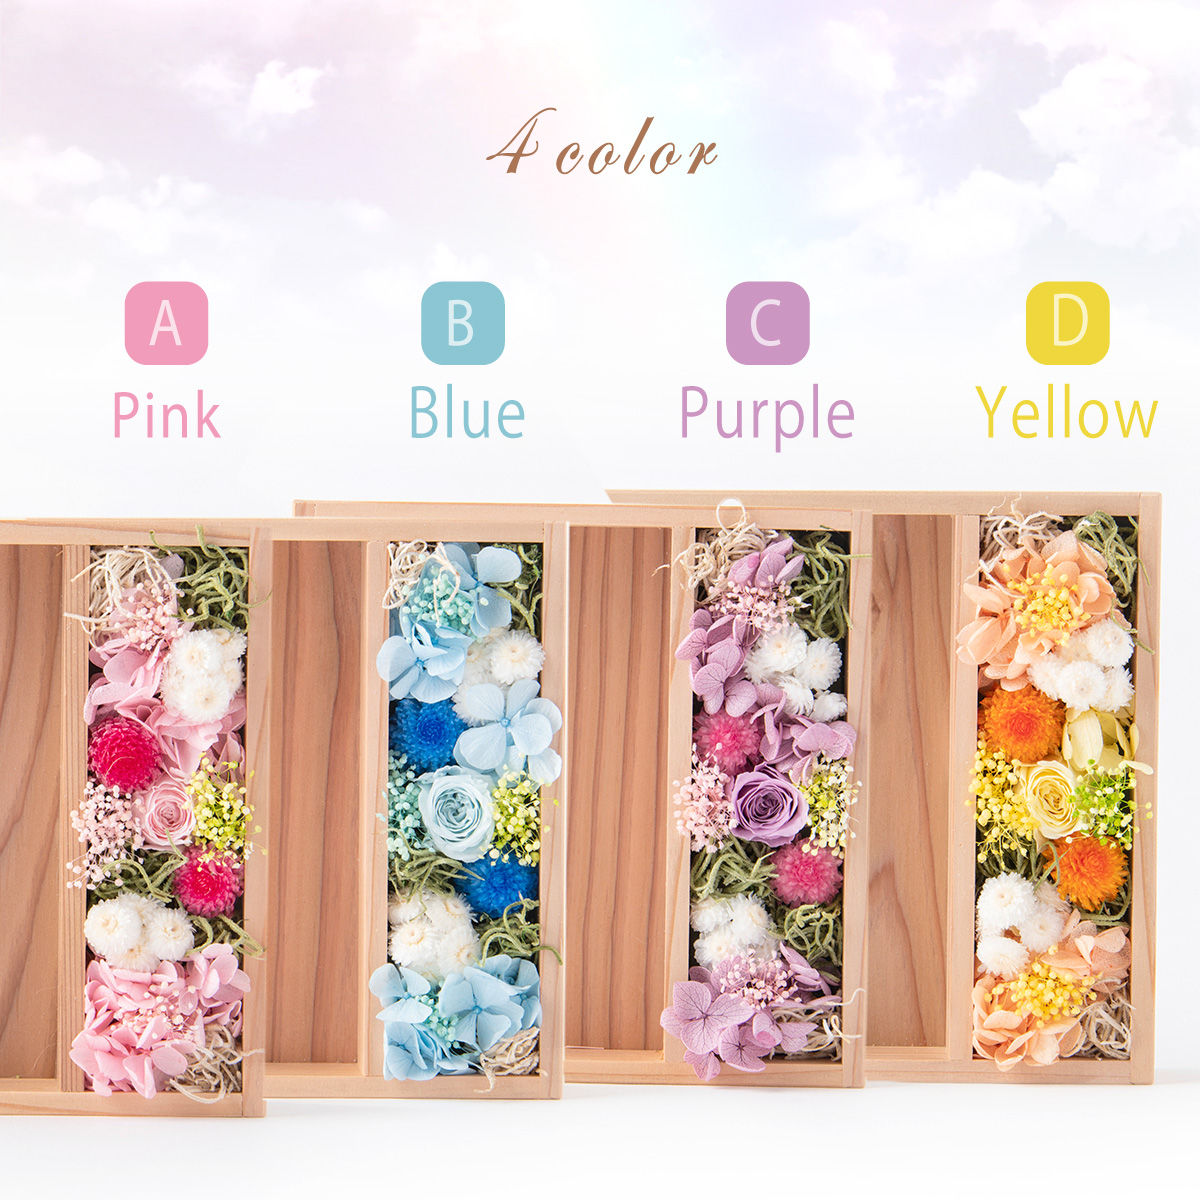  pet .... flower preserved flower picture frame name inserting plate .. is . garden for pets memorial dog cat ... bird water instead un- necessary 